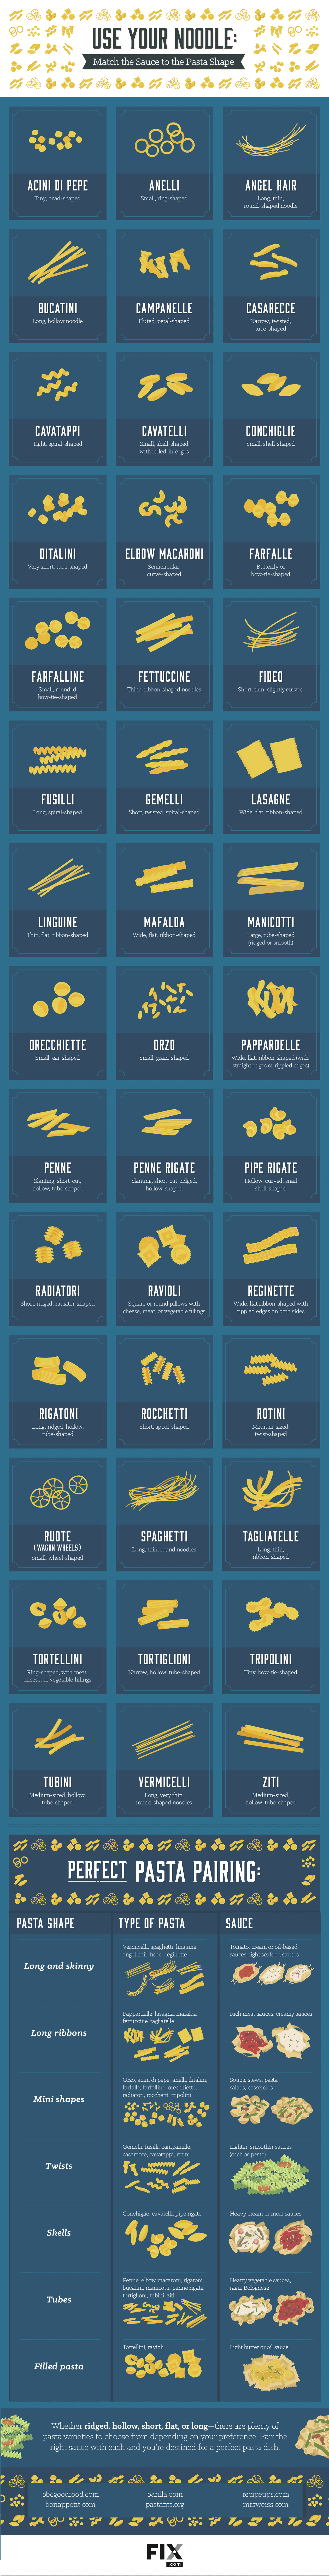 Use Your Noodle: Match the Sauce to the Pasta Shape 1